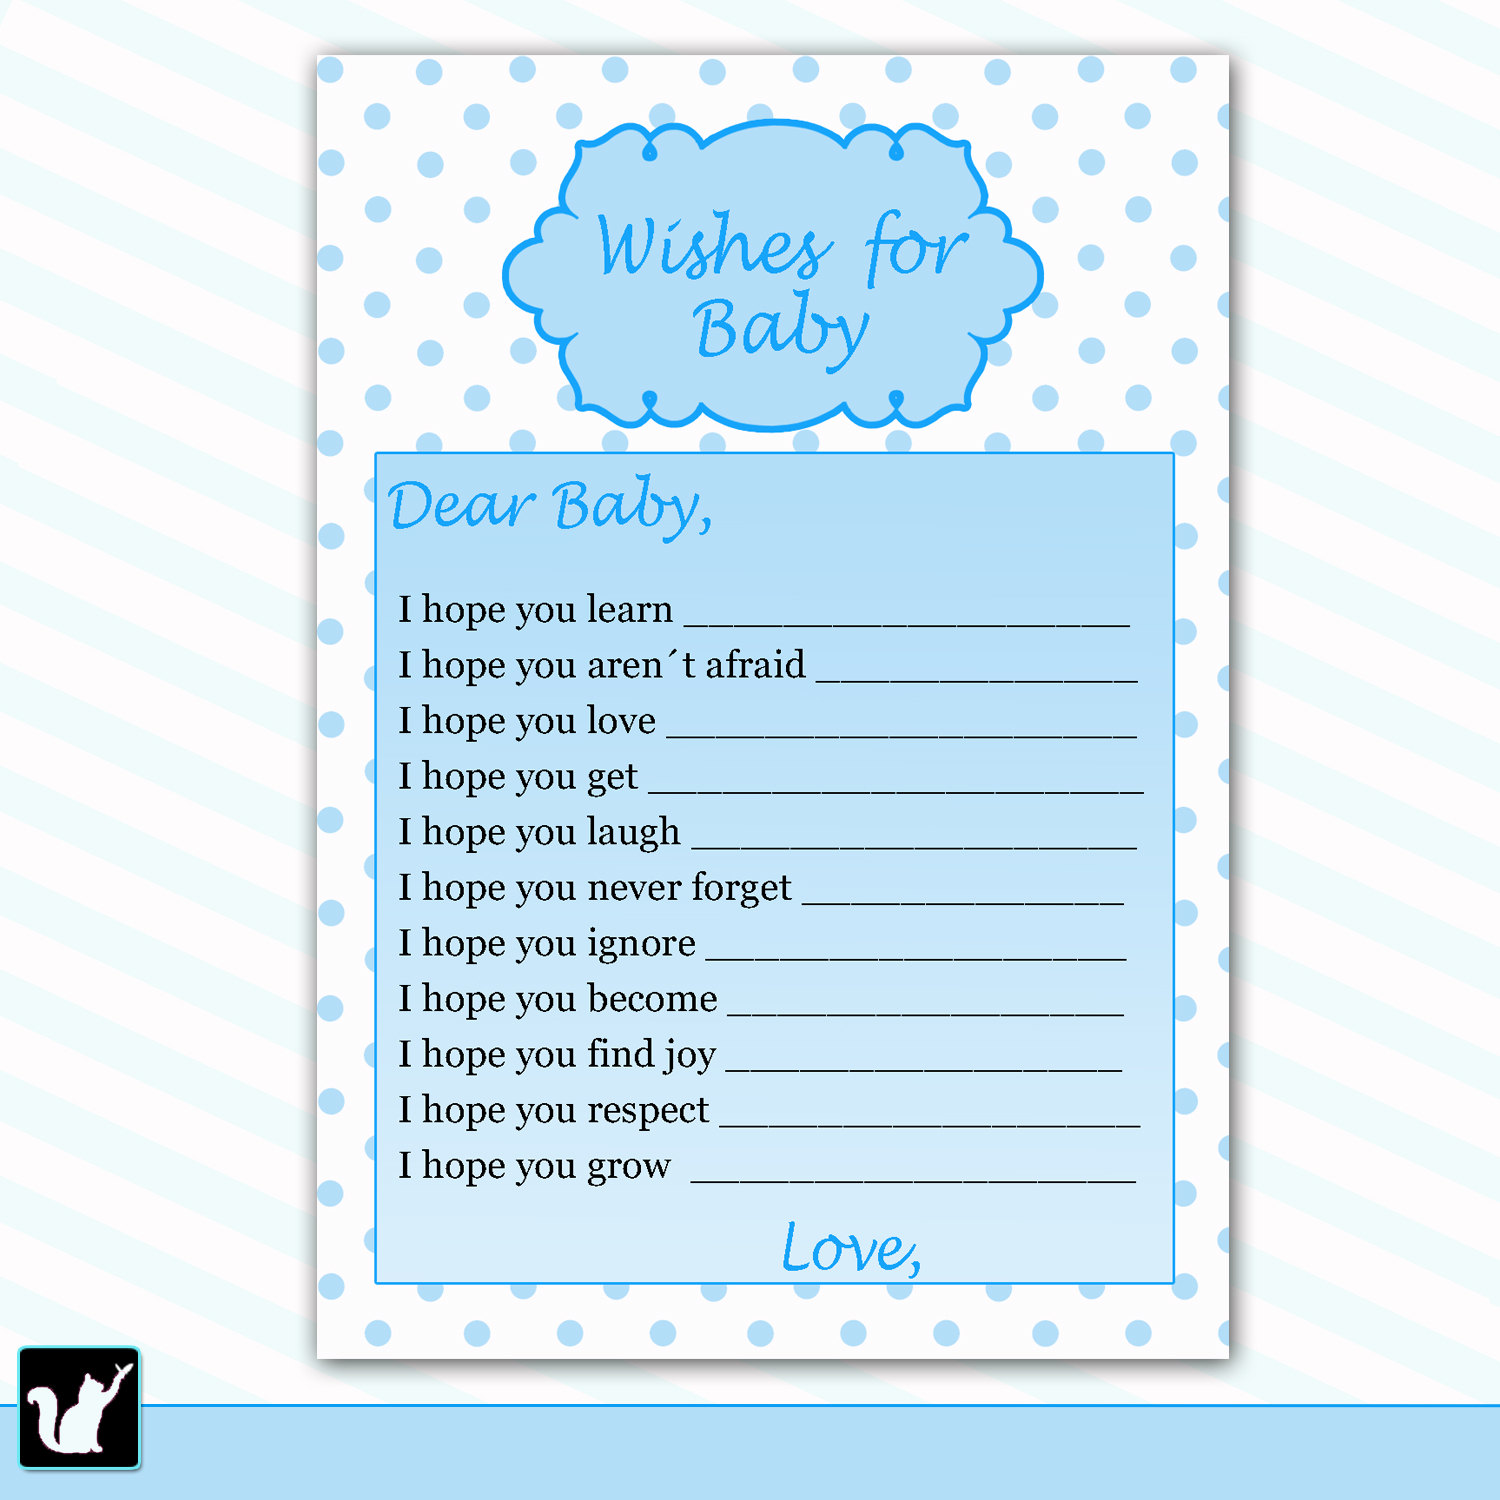 6-best-images-of-printable-wishes-for-baby-boy-printable-baby-shower